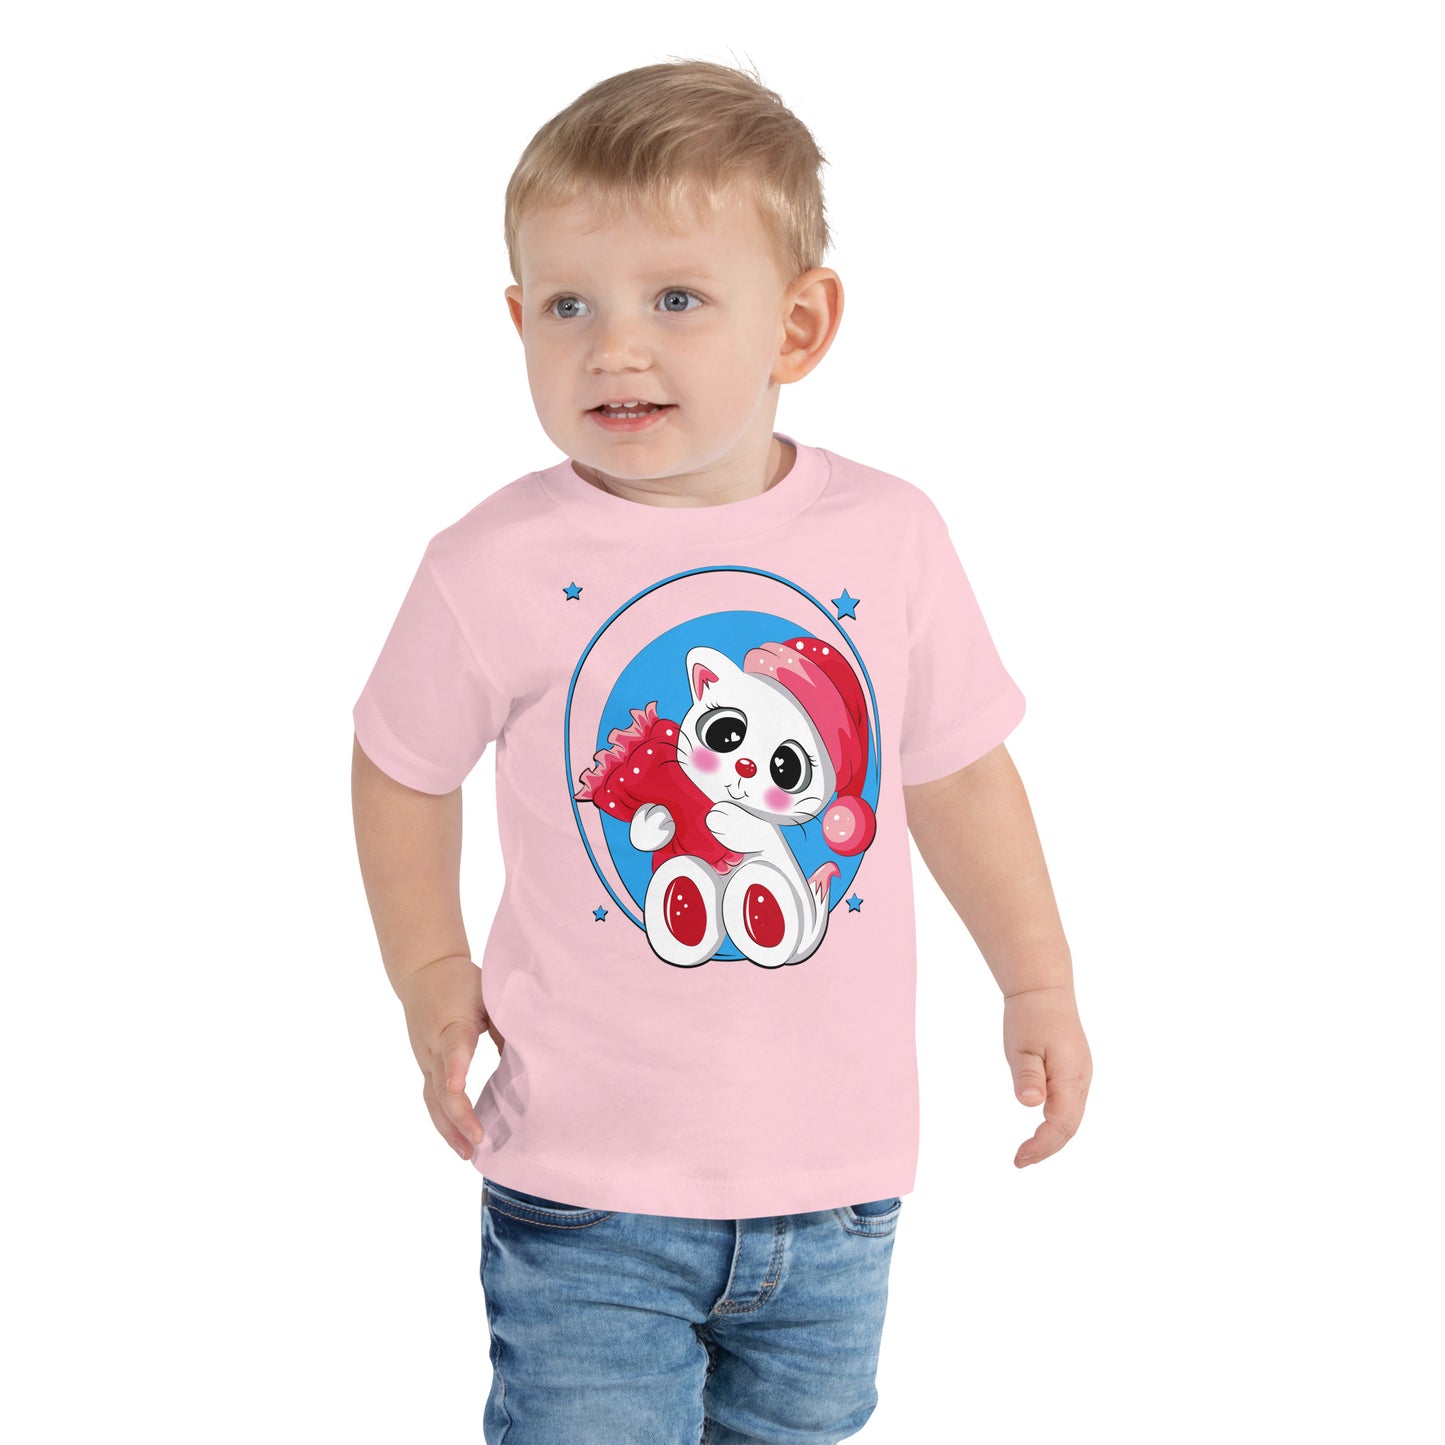 Cute Kitty Cat with Pink Pillow T-shirt, No. 0331